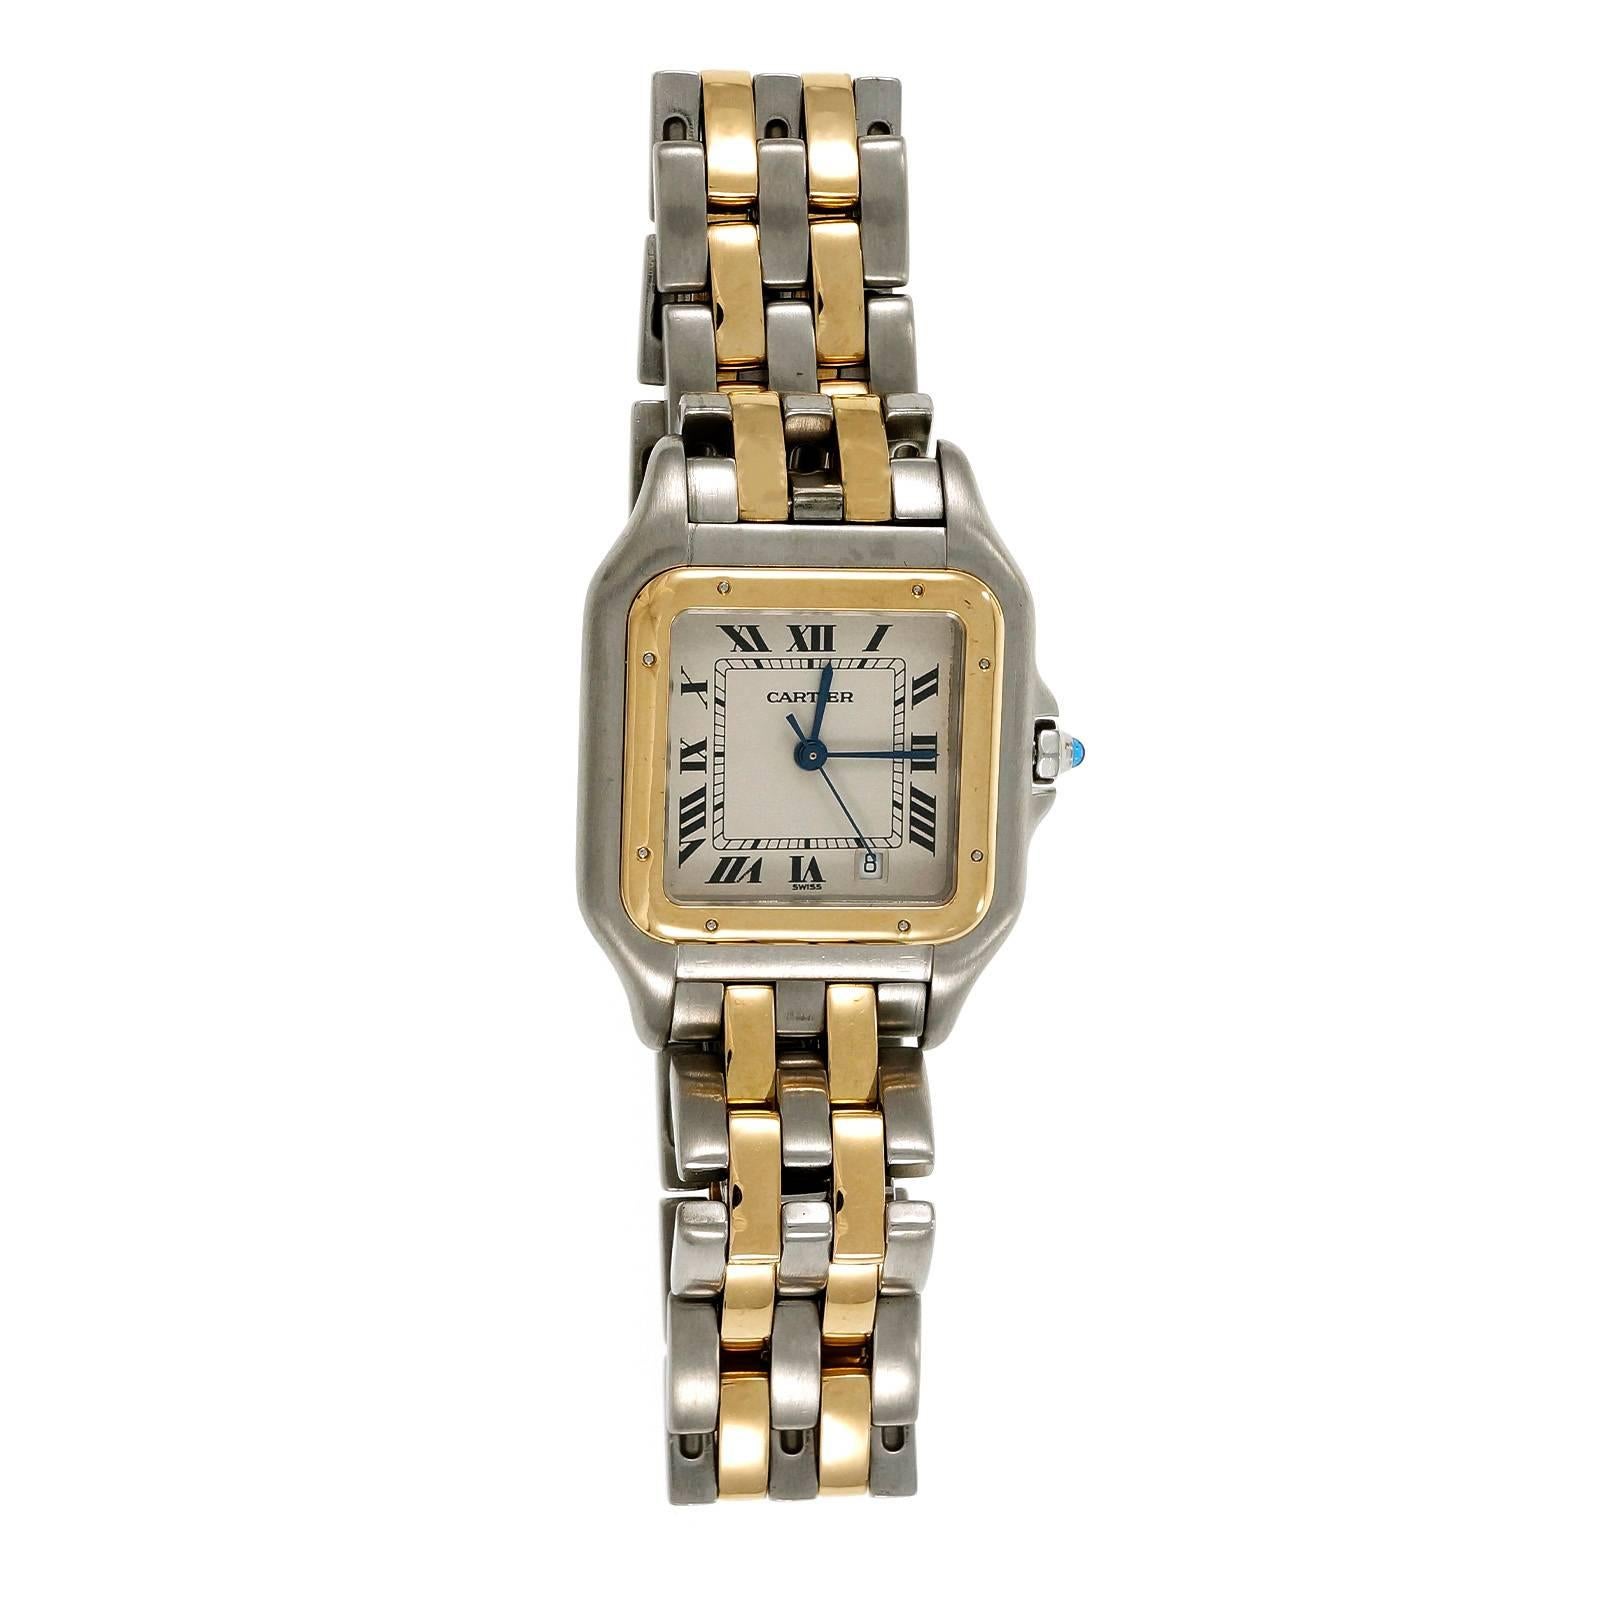 Medium Cartier Panthere Quartz watch with 18k yellow gold and steel Panthere band. Quartz movement. All original.

18k yellow gold & steel
69.4 grams
Band length: 7 inches
Length: 36mm
Width: 27mm
Band width at case: 15mm
Case thickness: